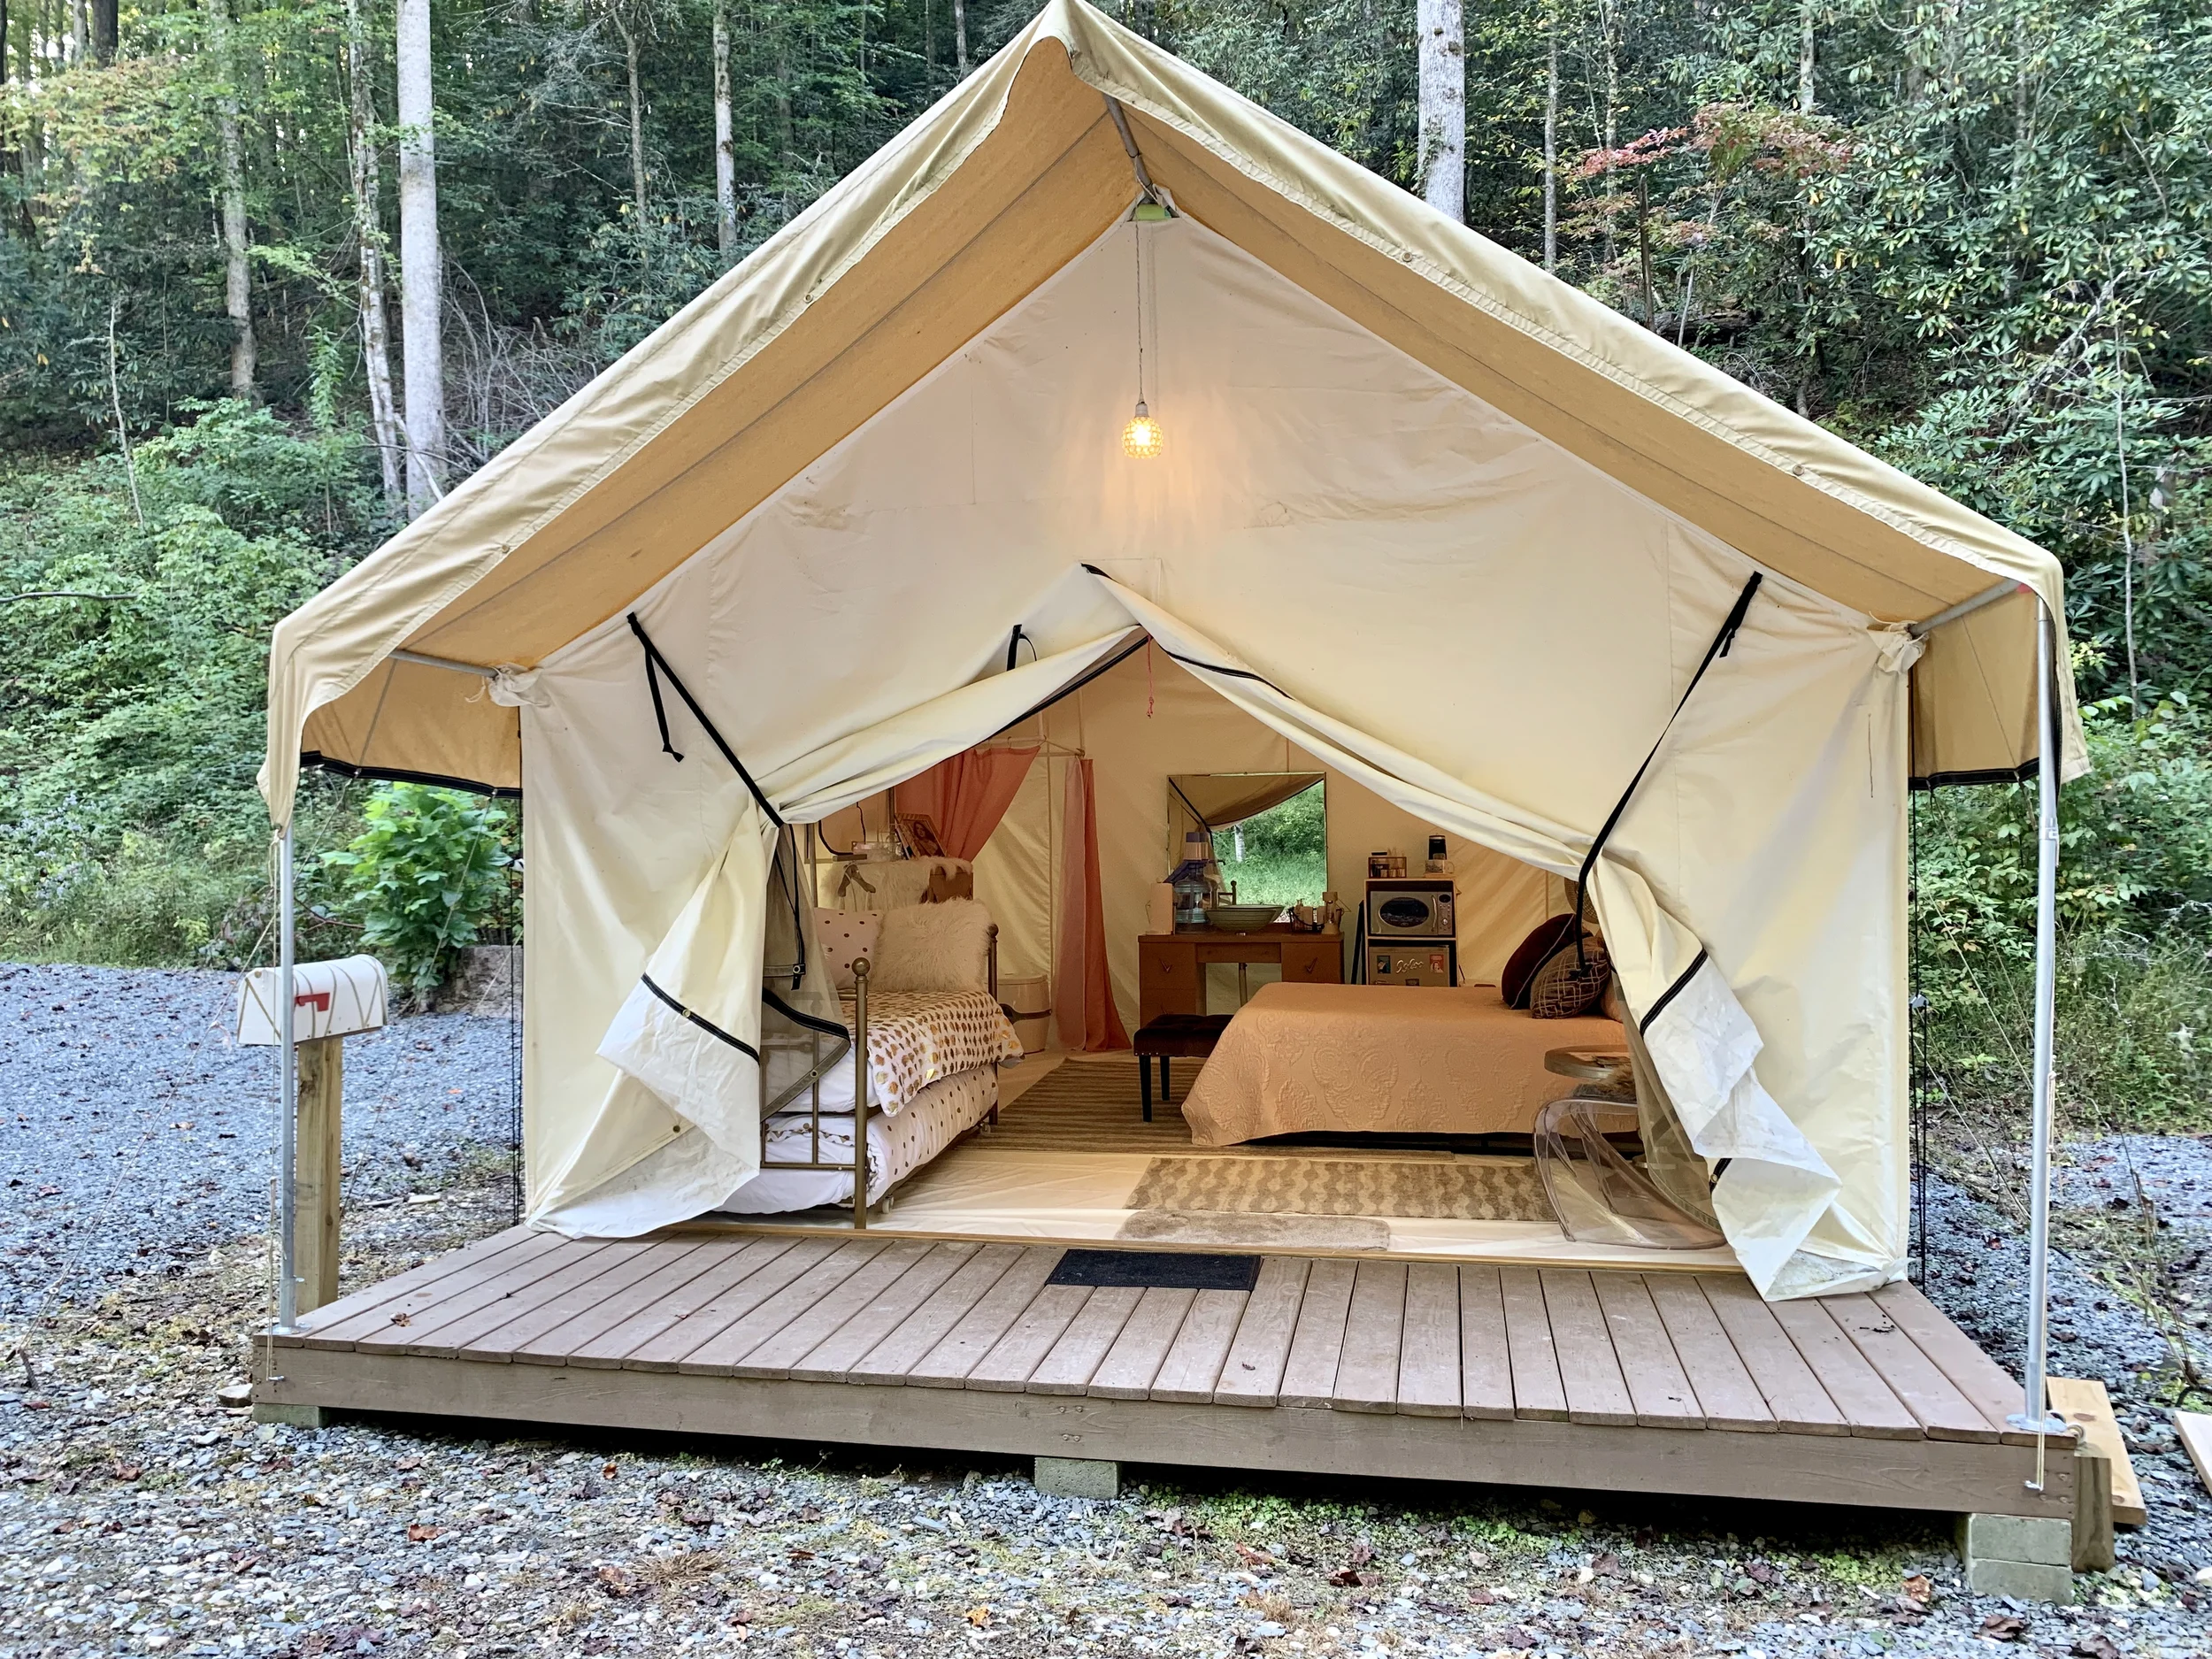 Safari glamping tent with a 50's glamour theme